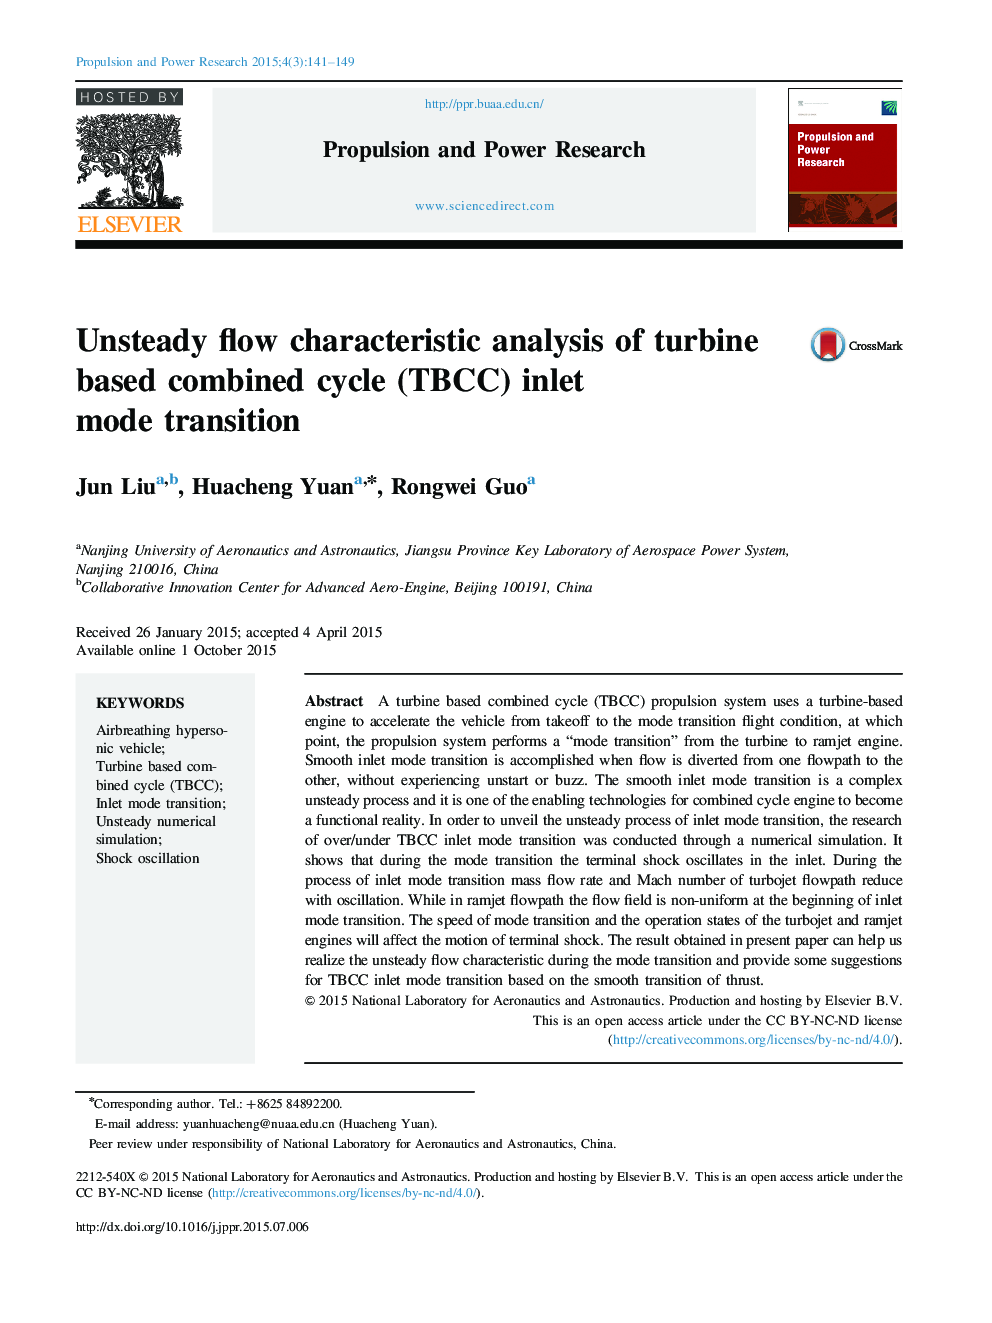 Unsteady flow characteristic analysis of turbine based combined cycle (TBCC) inlet mode transition 